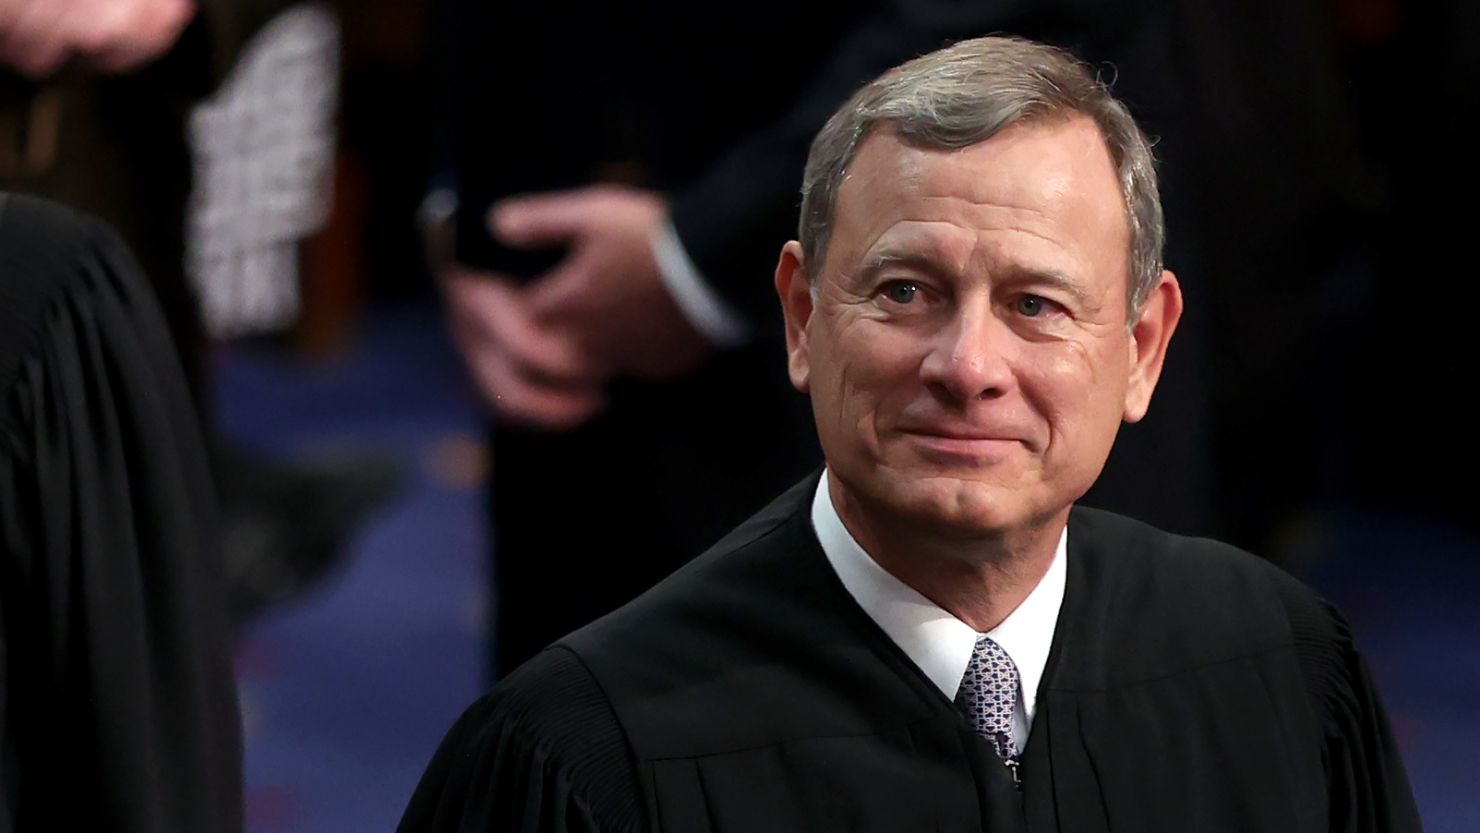 Supreme Court Chief Justice John Roberts is seen prior to President Joe Biden giving his State of the Union address during a joint session of Congress at the US Capitol on March 1, 2022.